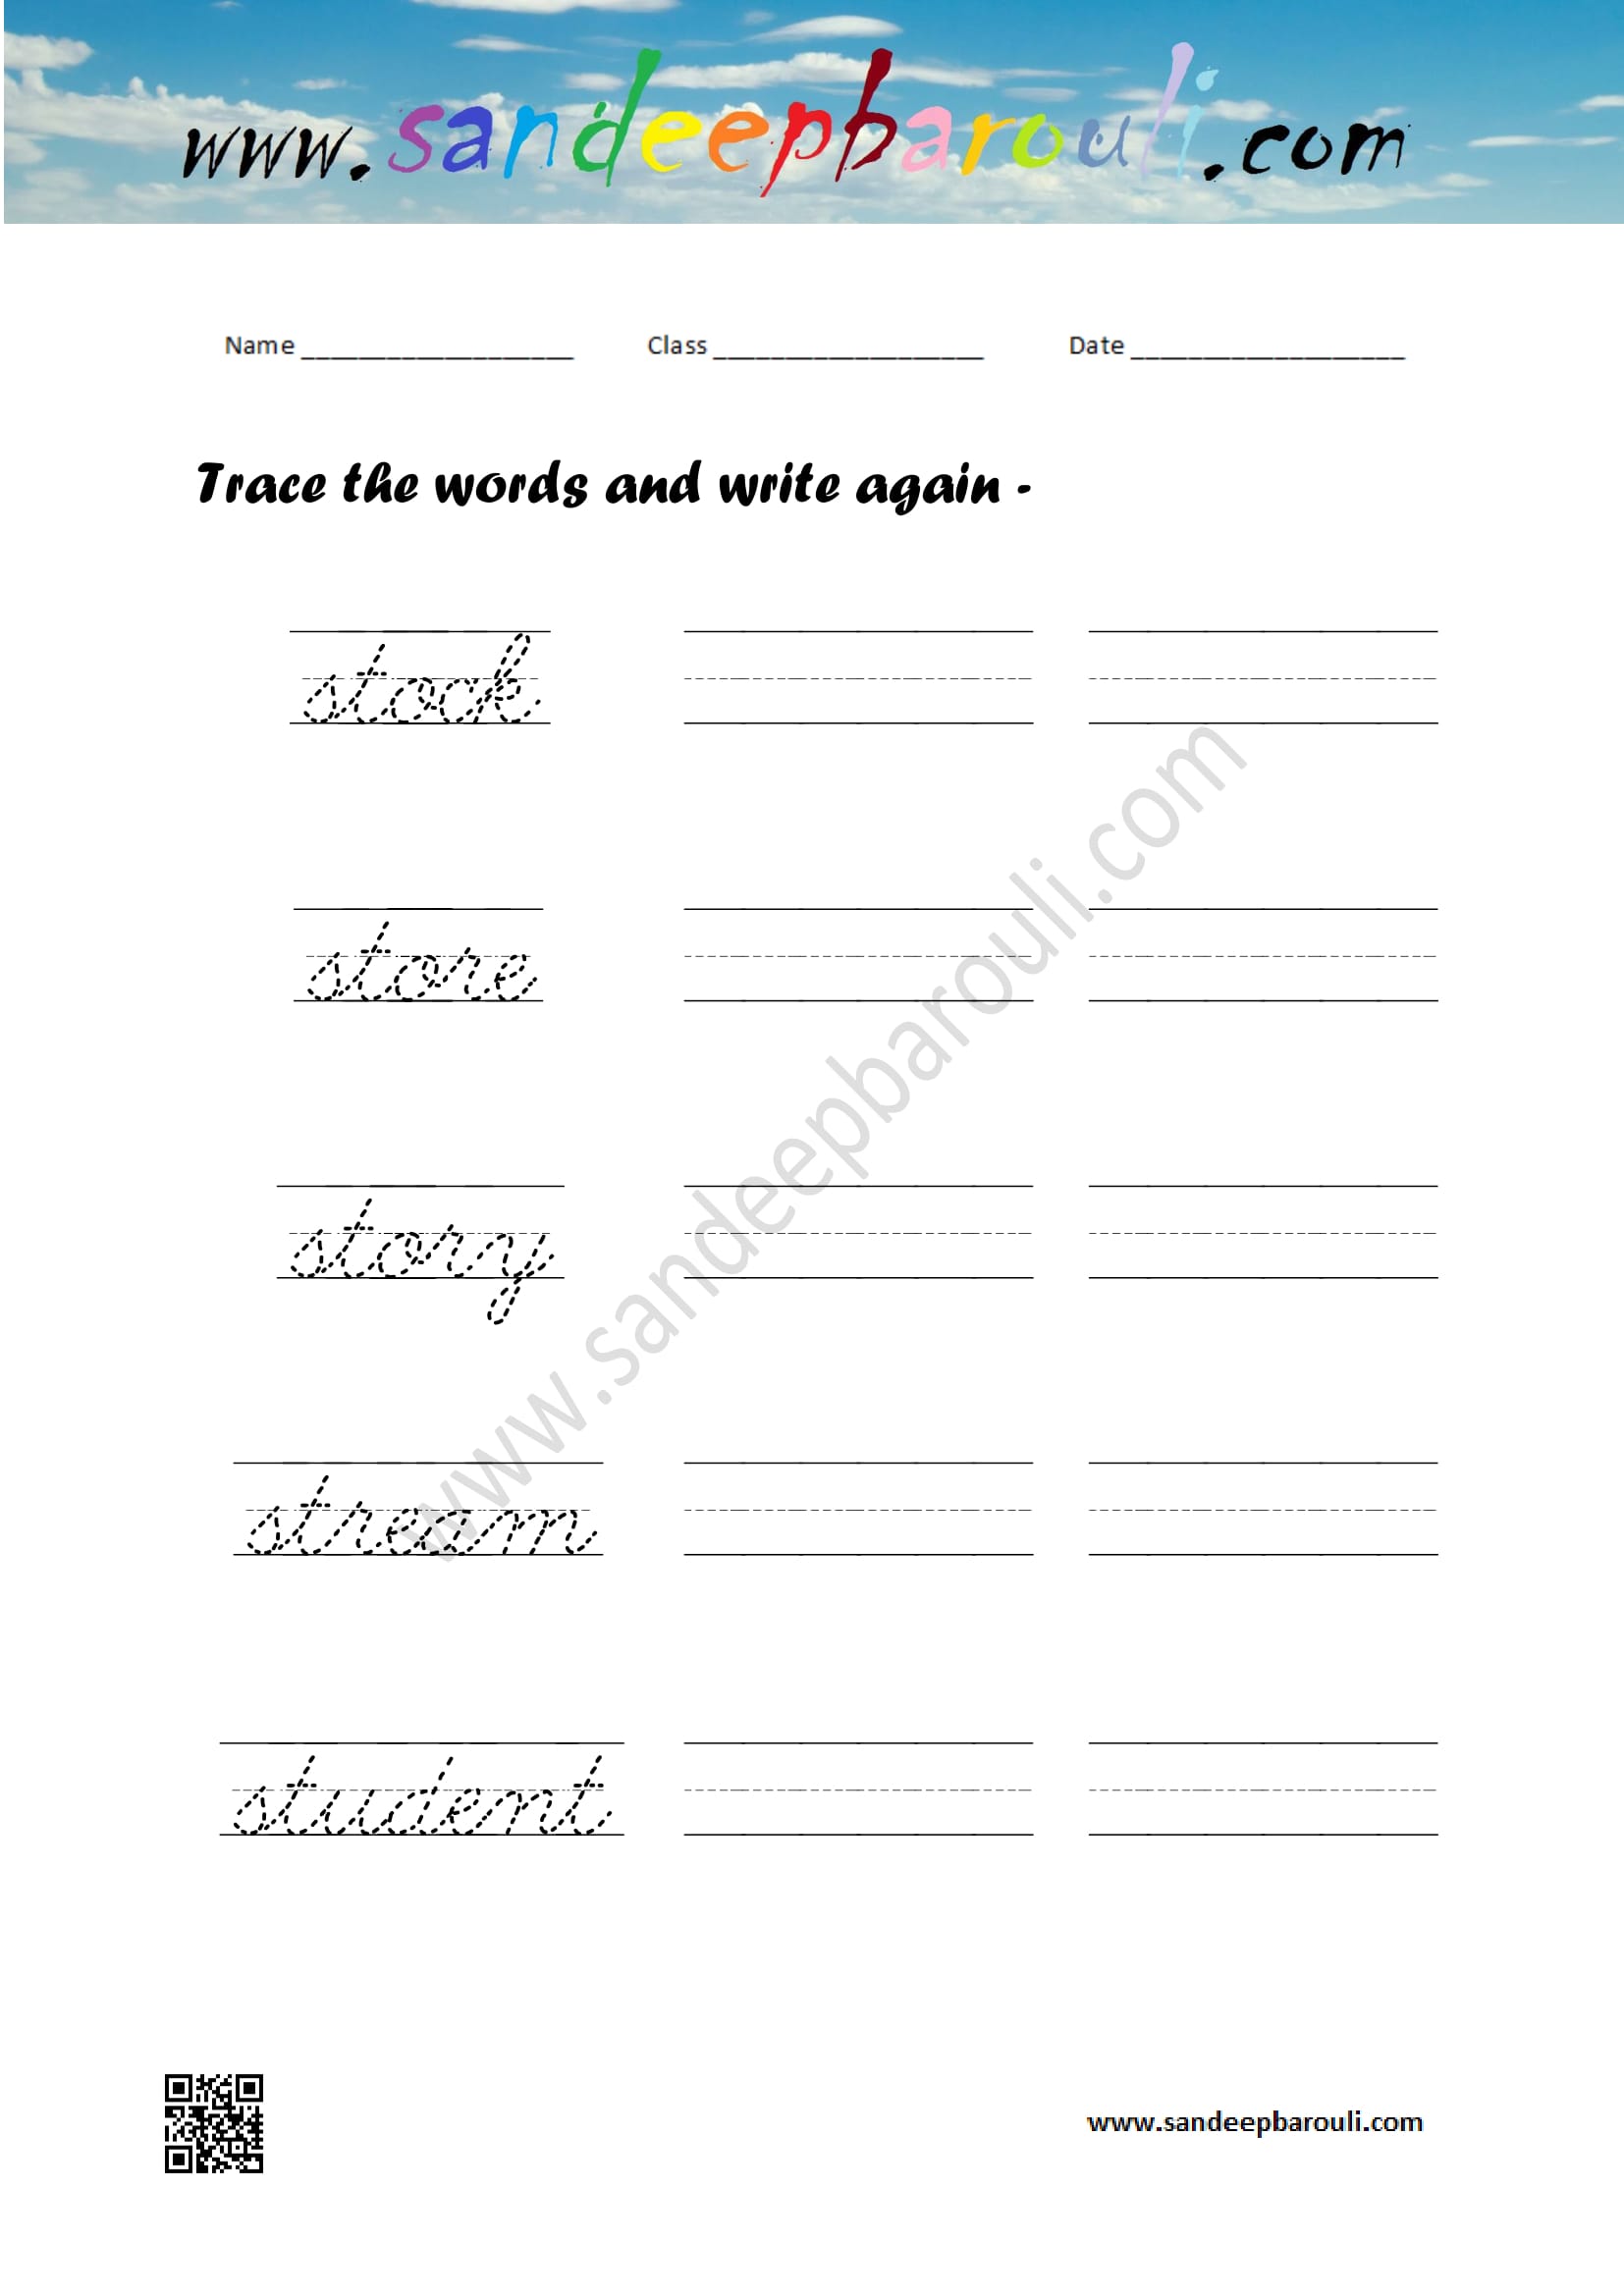 Cursive writing worksheet – trace the words and write again (110)